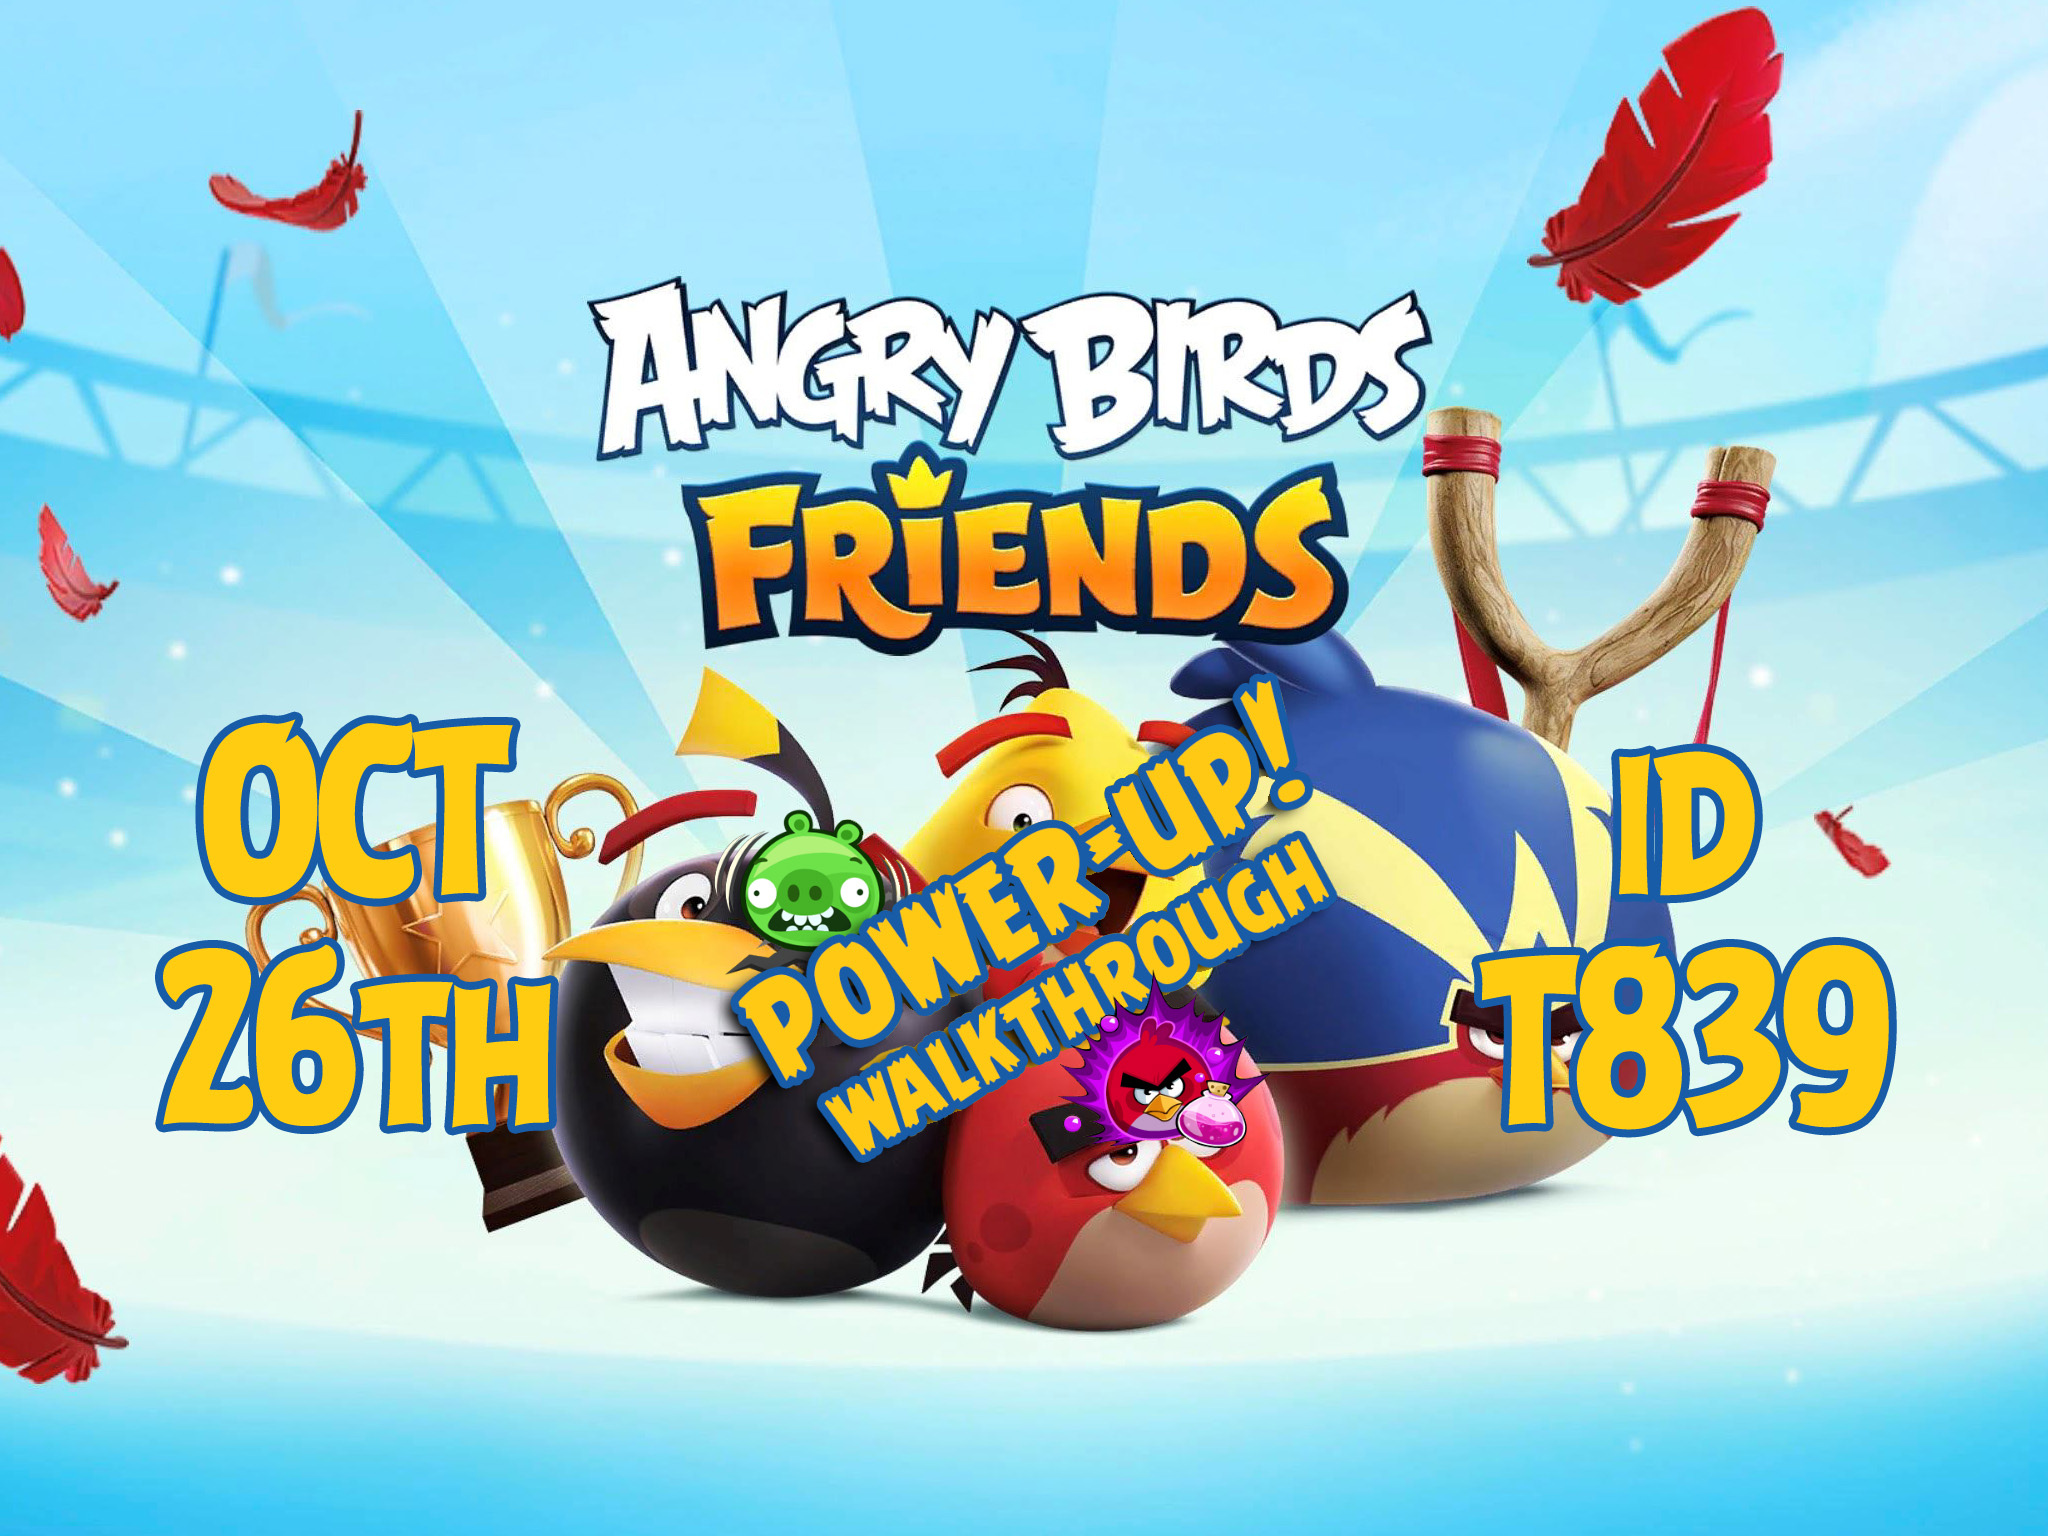 Angry-Birds-Friends-Tournament-T839-Feature-Image-PU